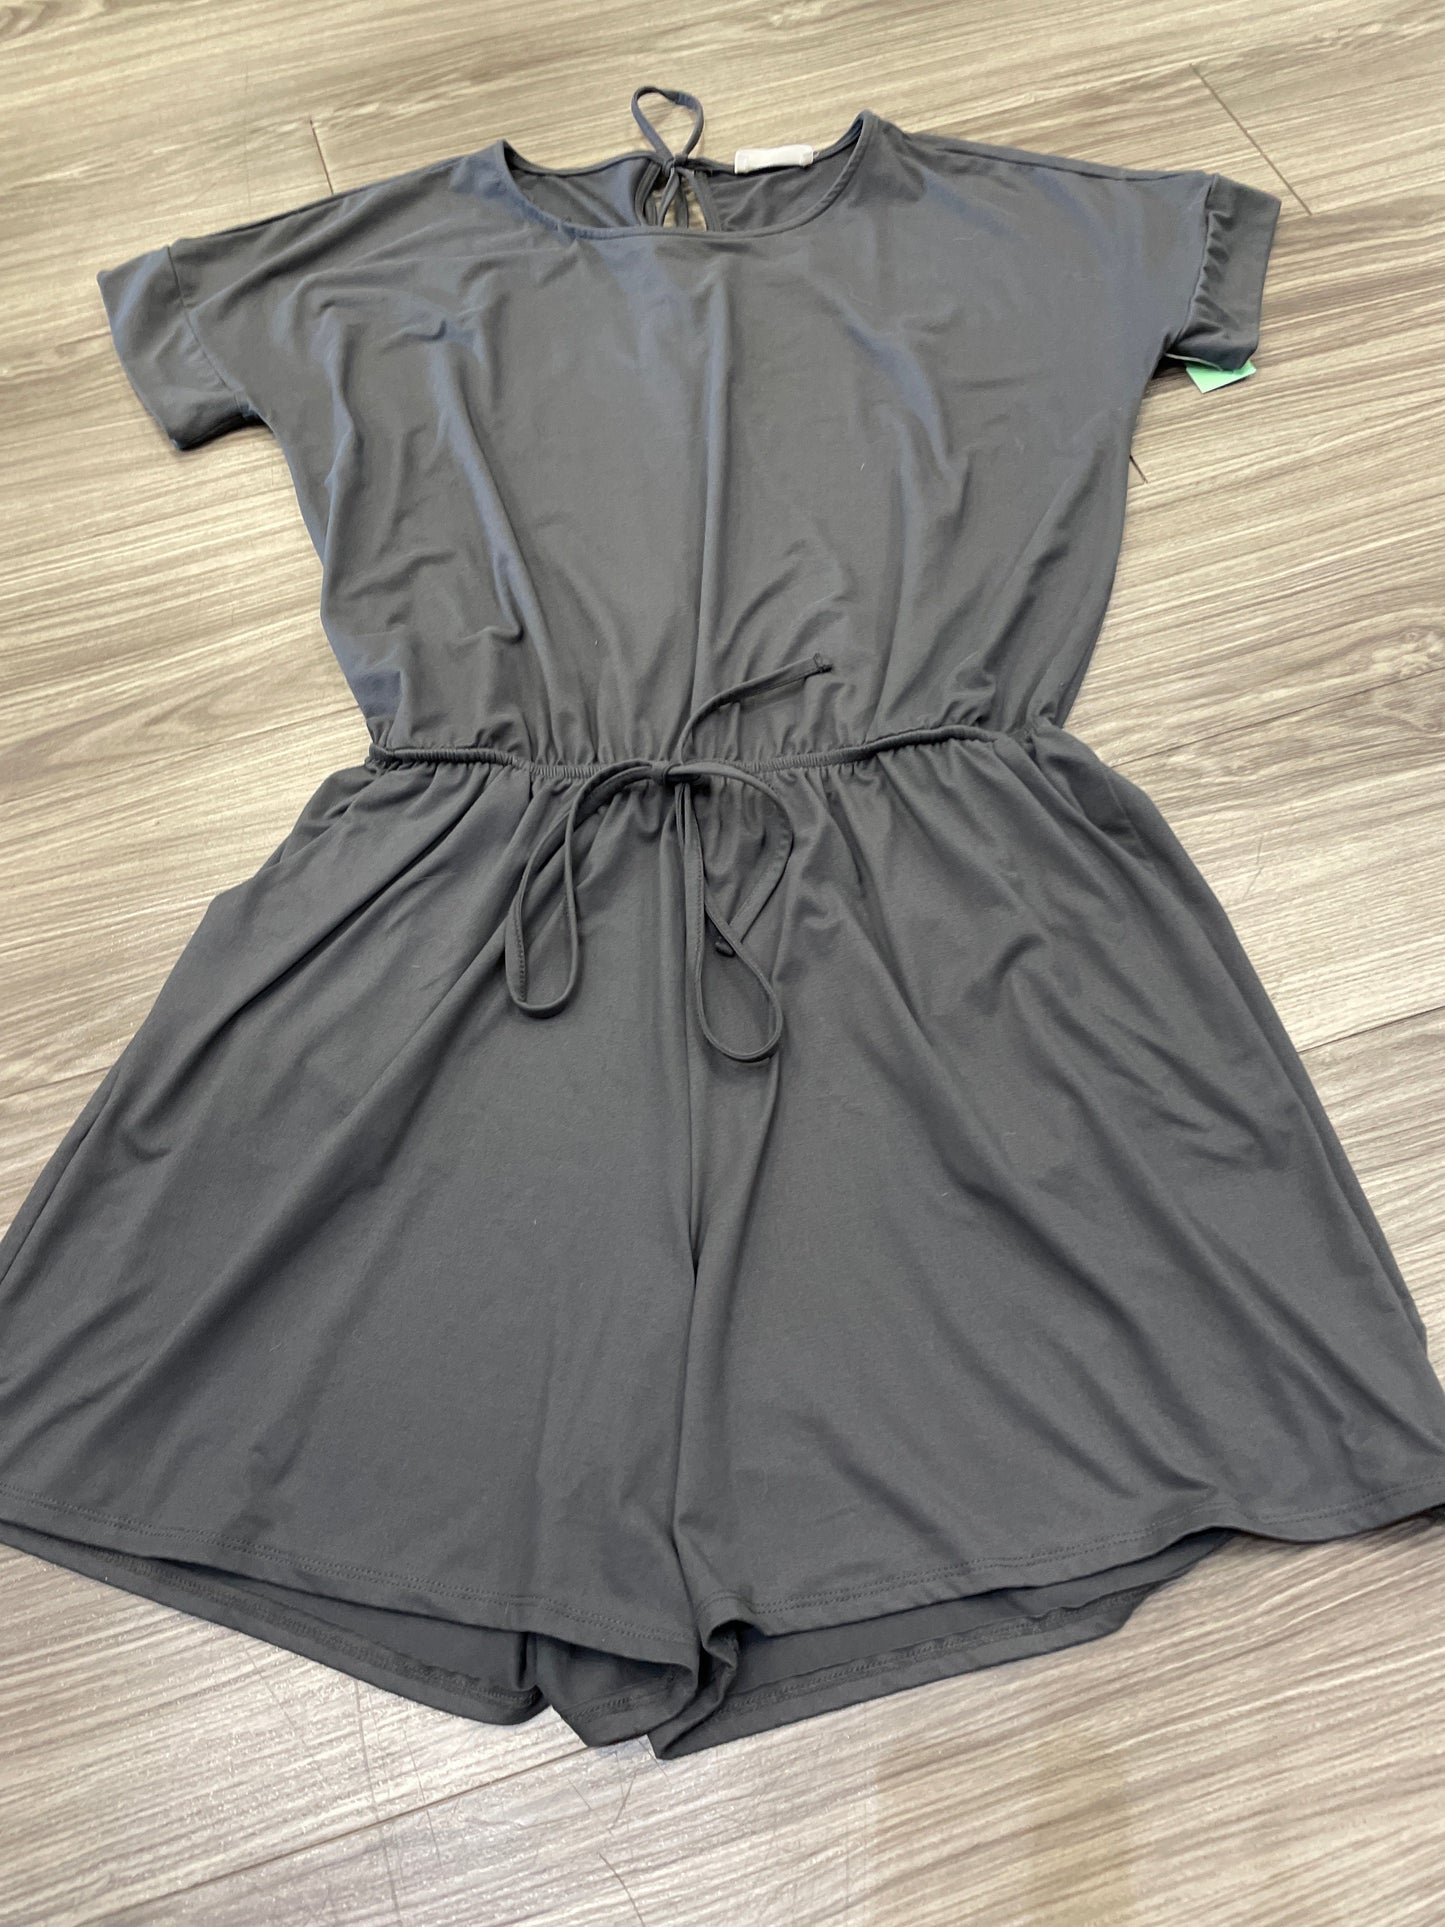 Grey Romper Zenana Outfitters, Size 1x